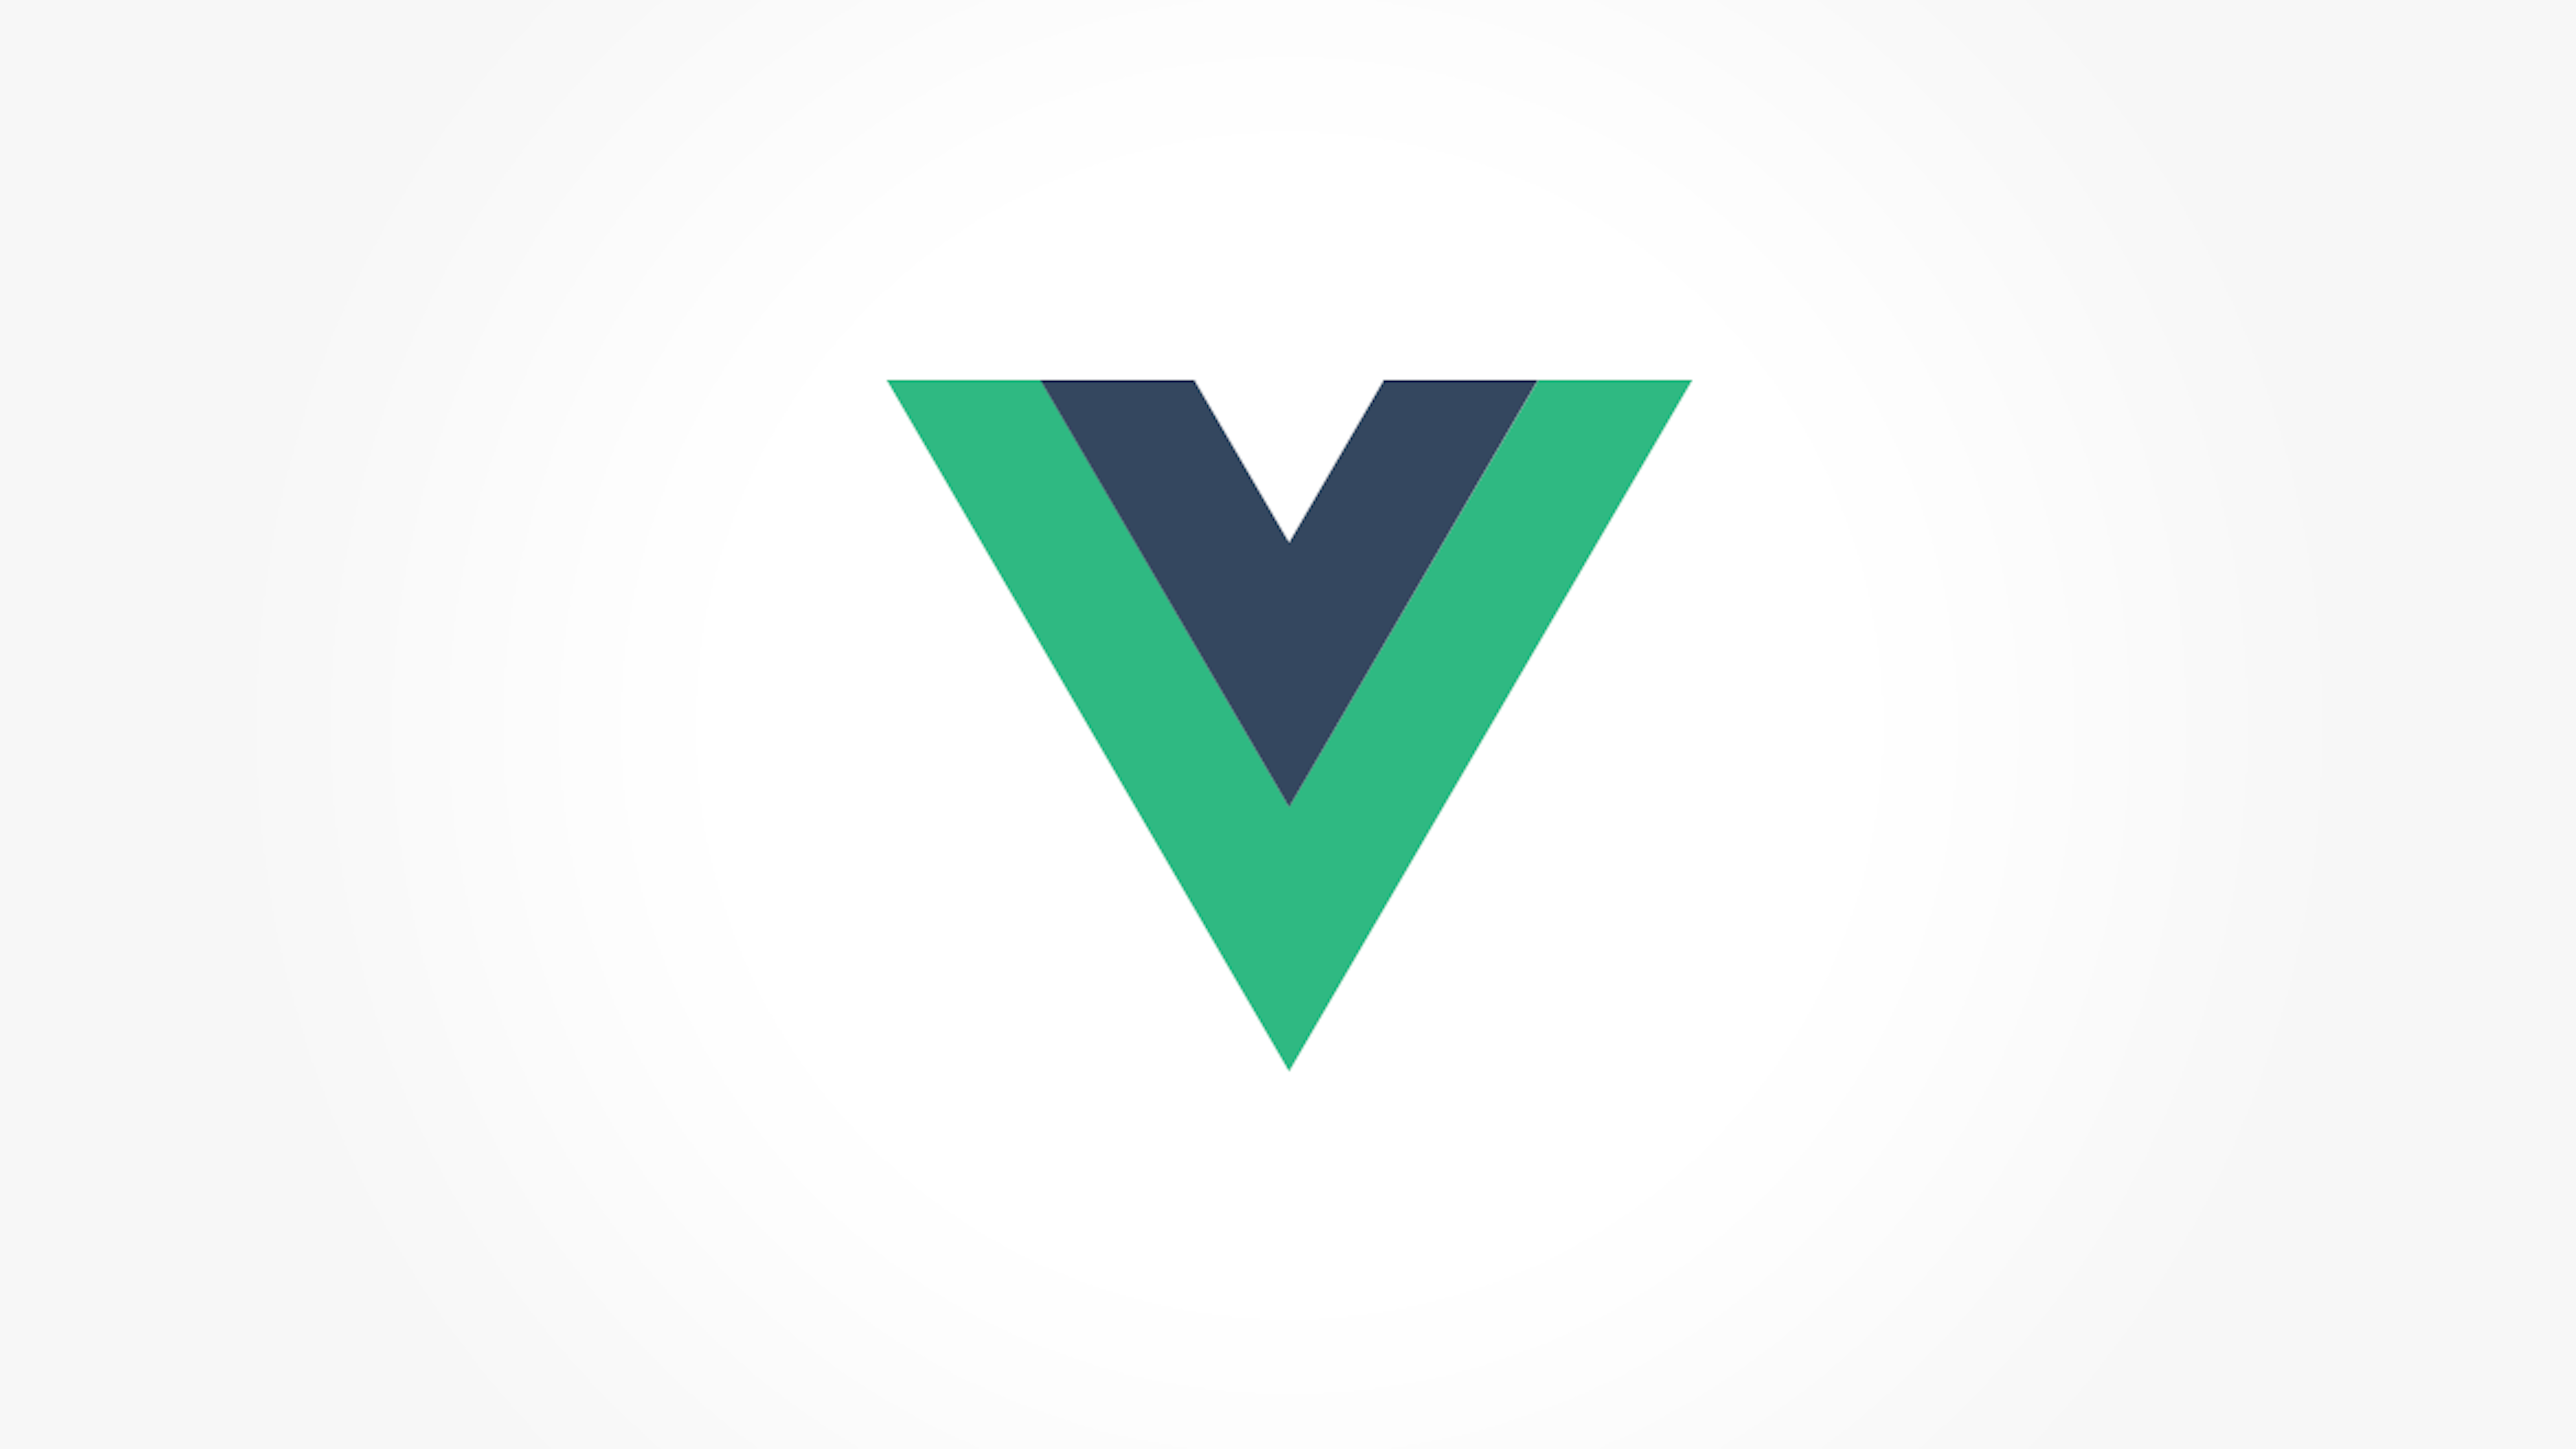 How to make your Vue Js application faster